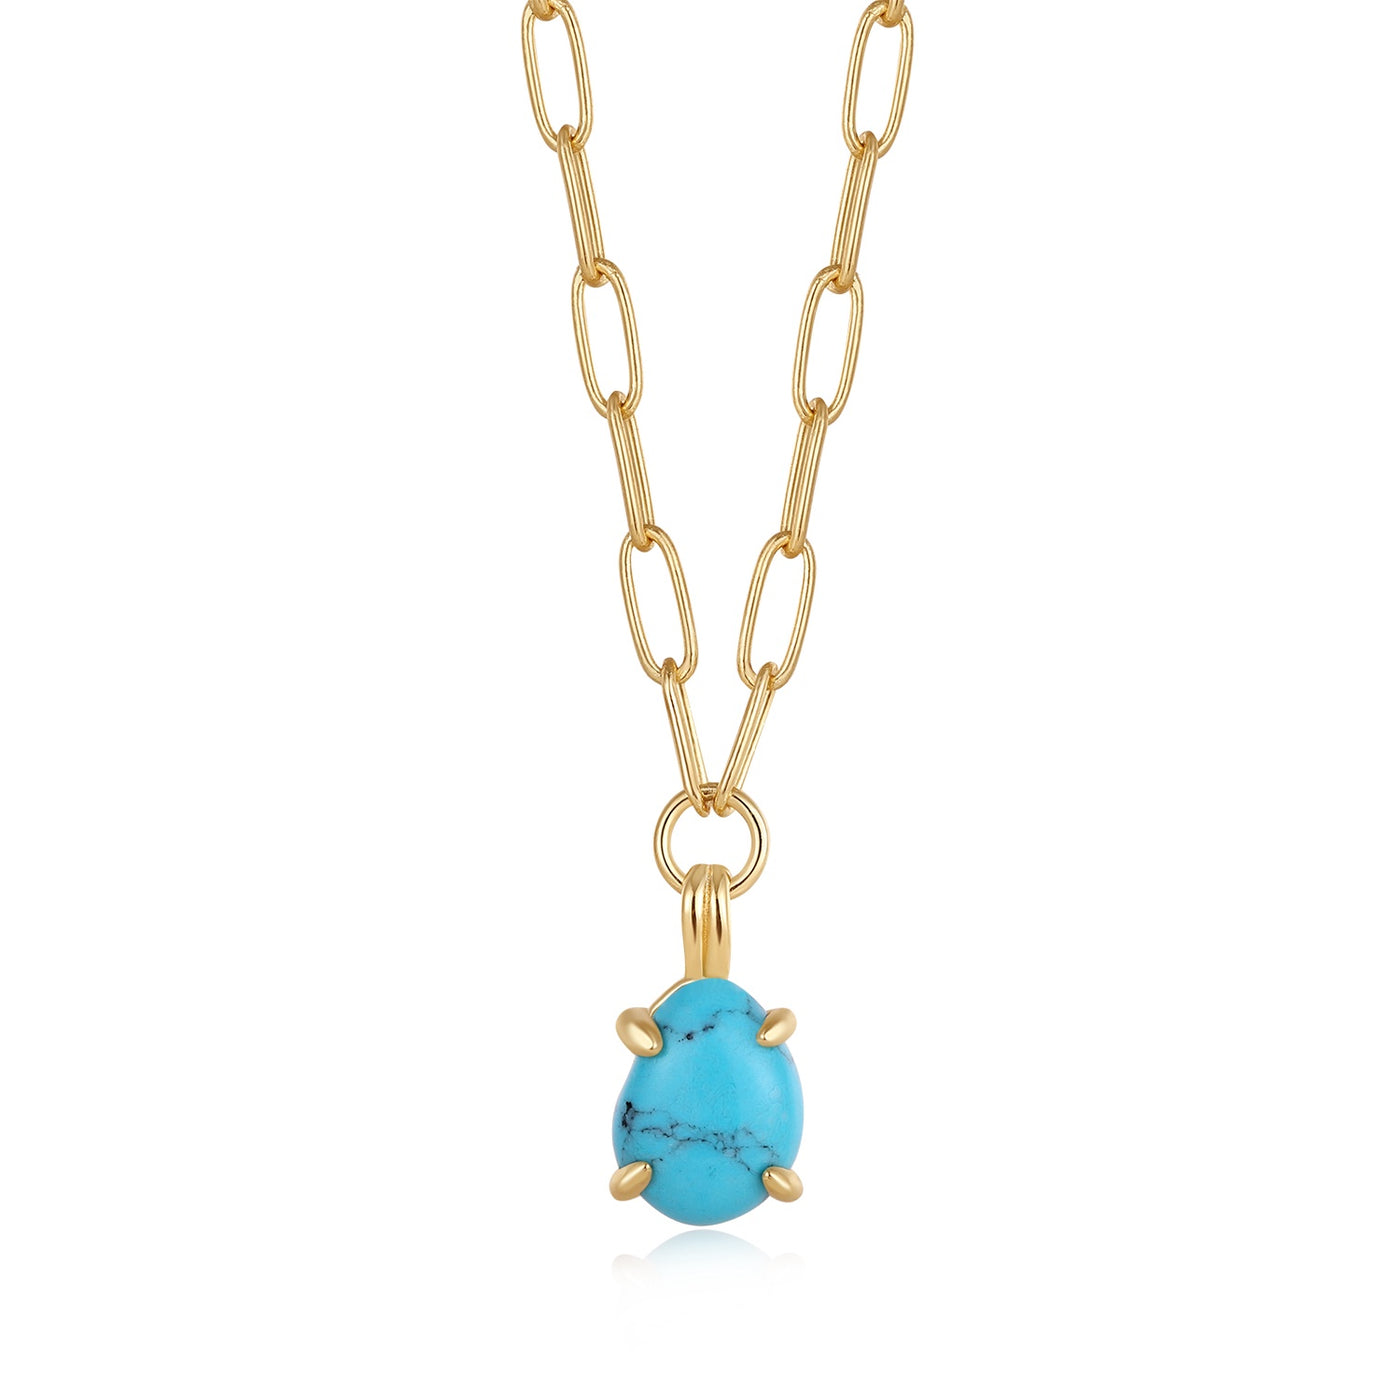 Making Waves - Turquoise Chunky Chain Drop Pendant Necklace